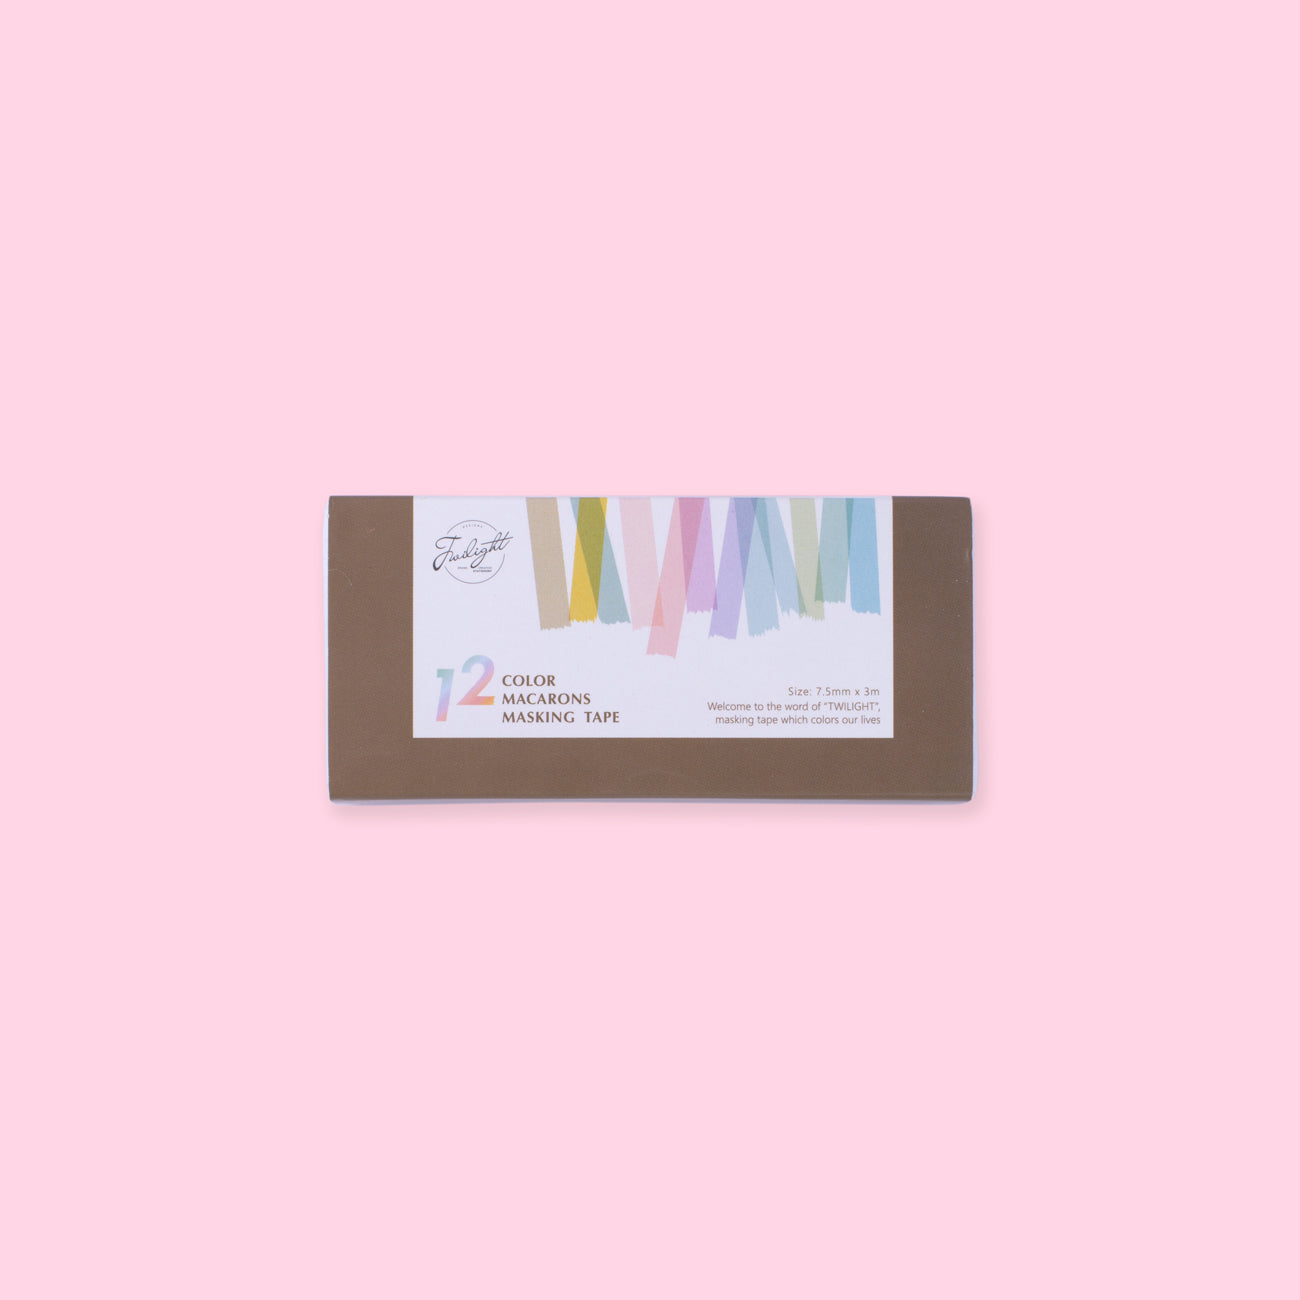 Pastel Paper Clip - Neat and Clean - Sakura — Stationery Pal